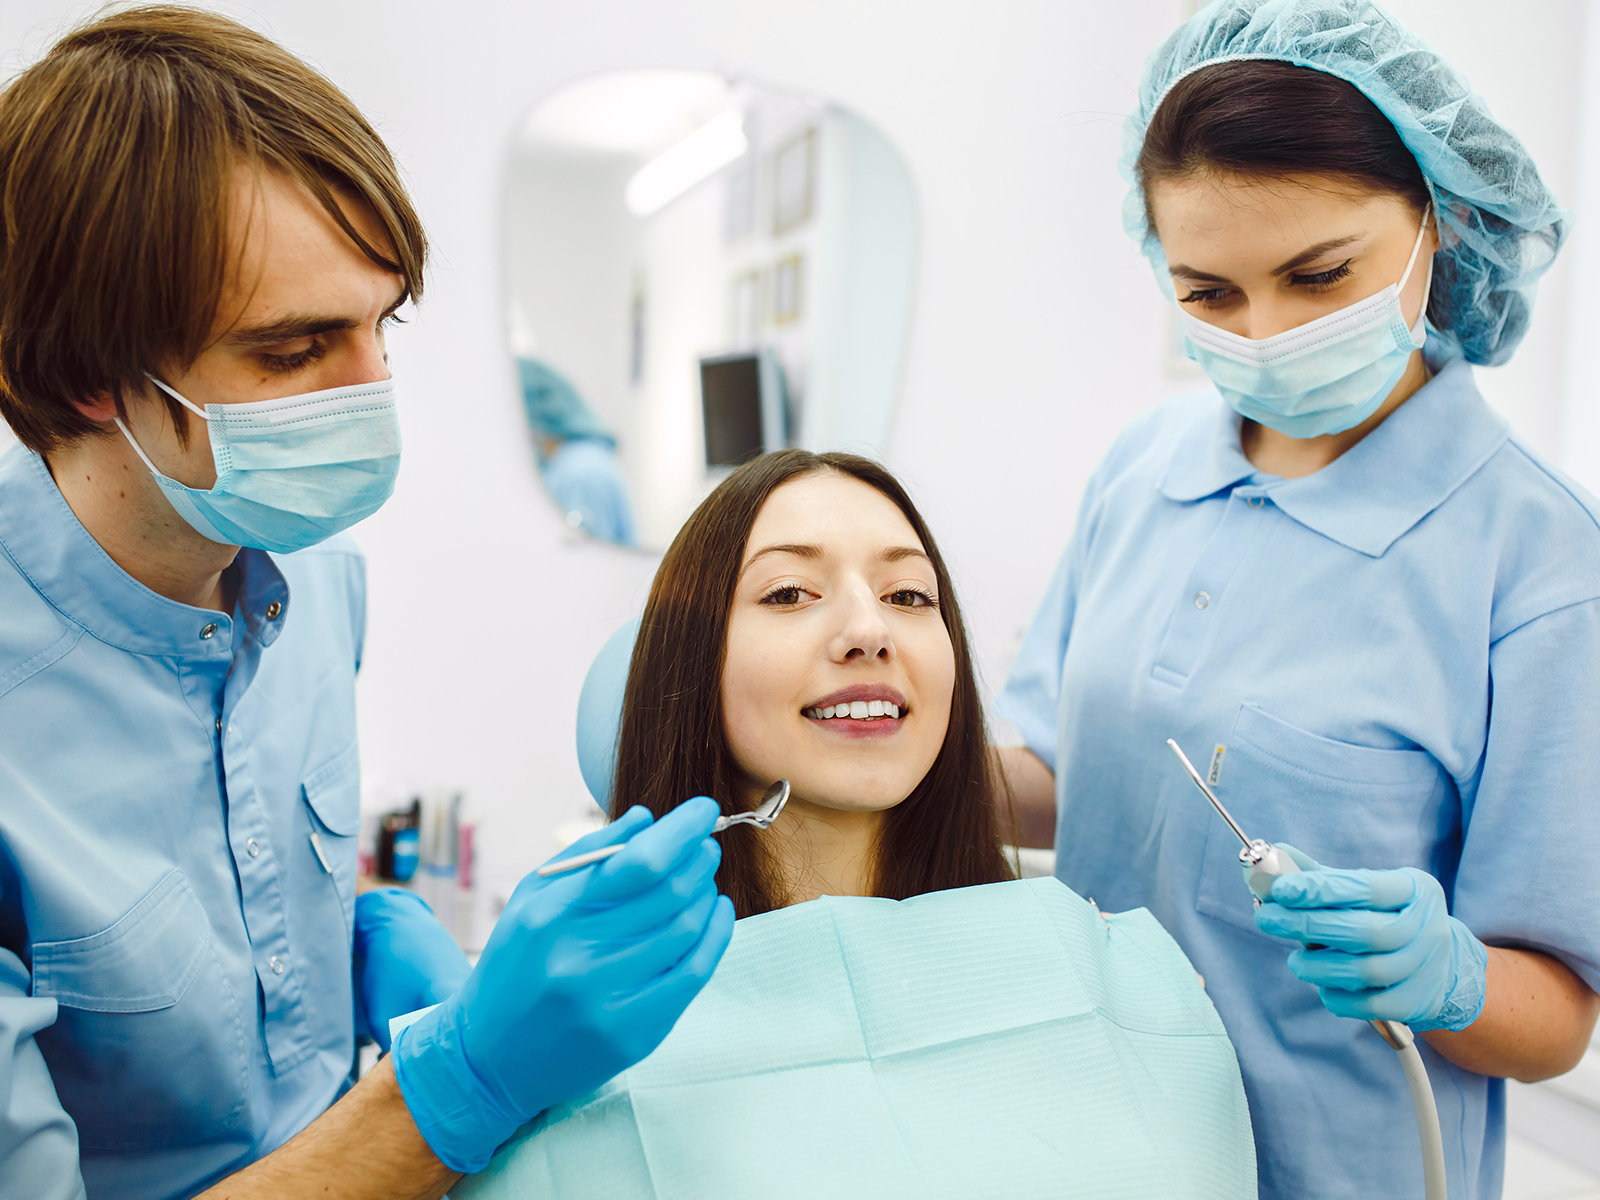 What Kind of Treatment Do Oral Surgeons Provide?